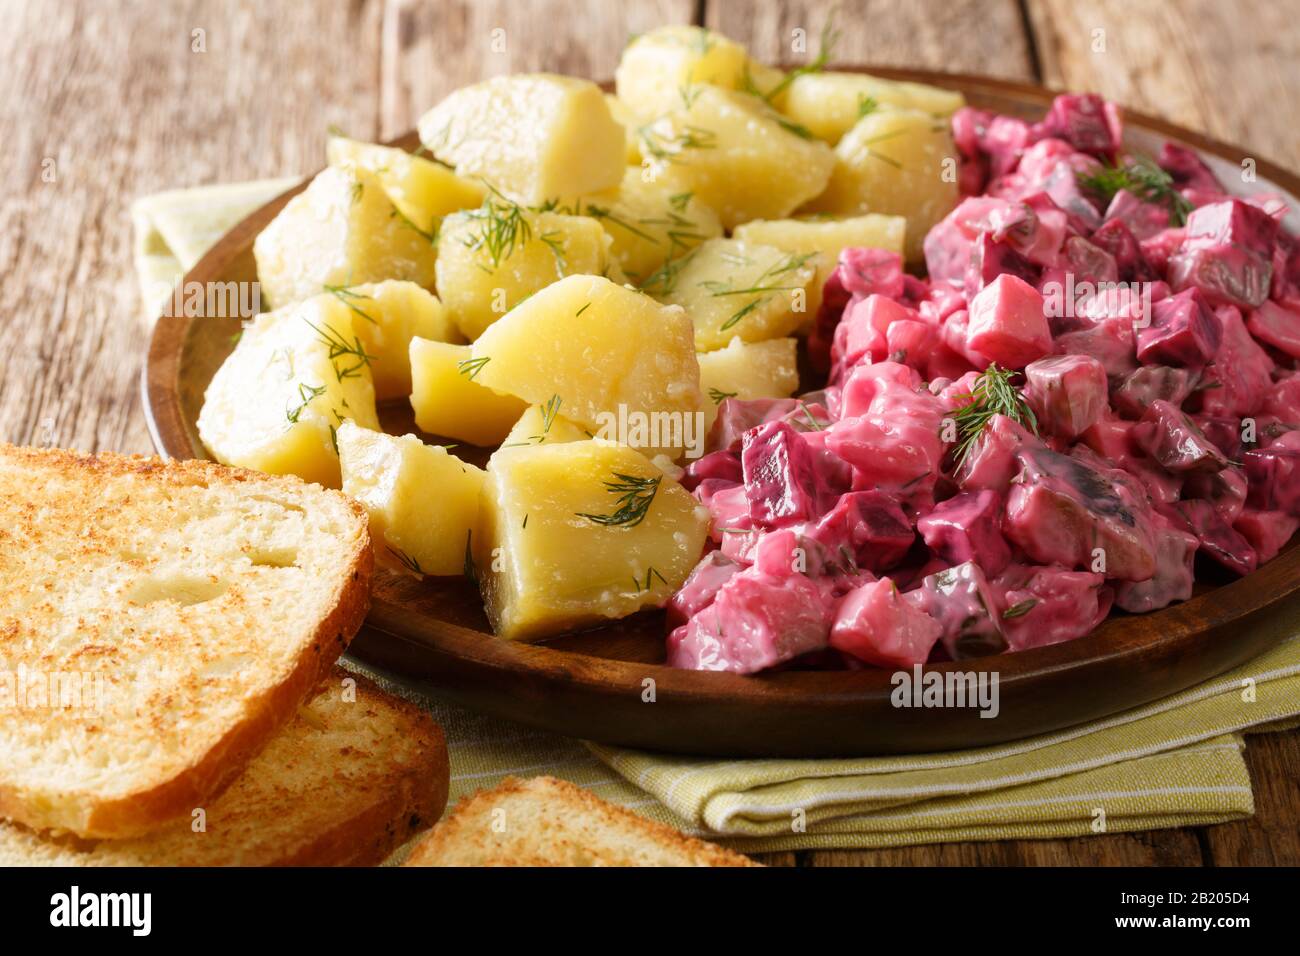 Tasty herring salad with vegetables and a side dish of boiled potatoes close-up in a plate on the table. horizontal Stock Photo